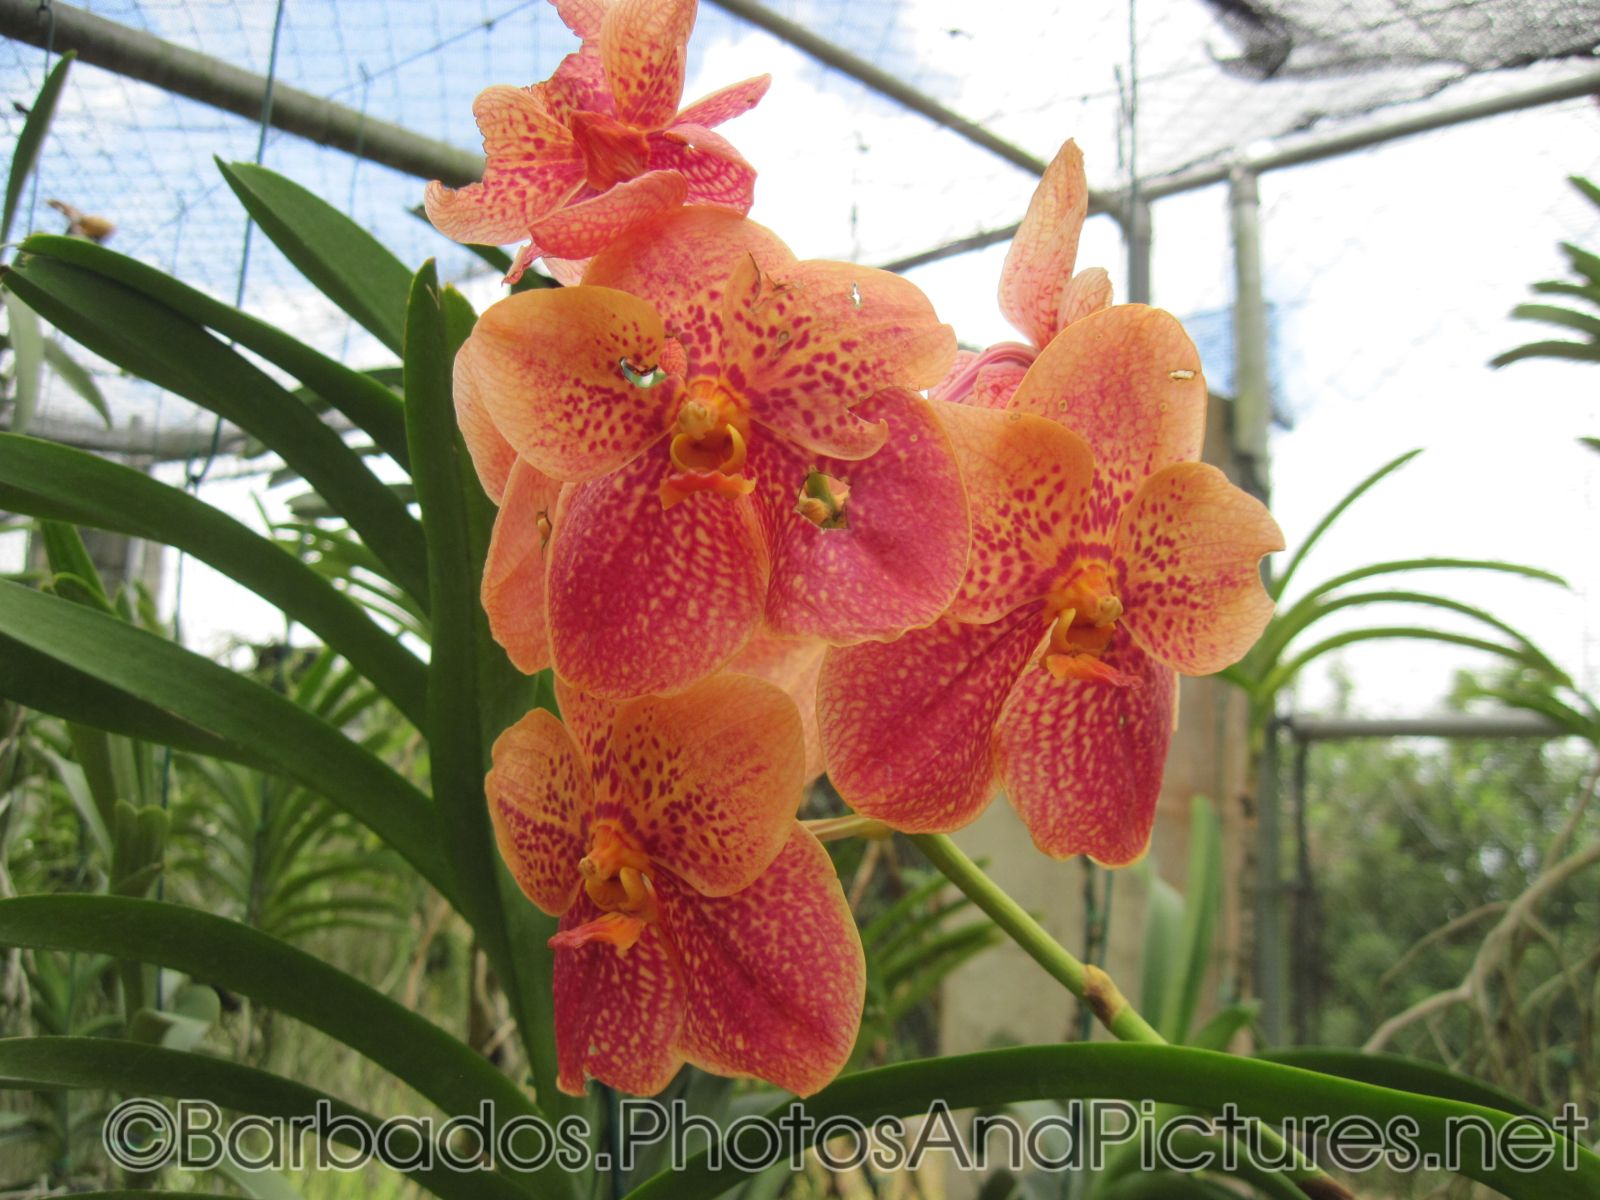 5 petal orange orchid with red accent at Orchid World Barbados.jpg
